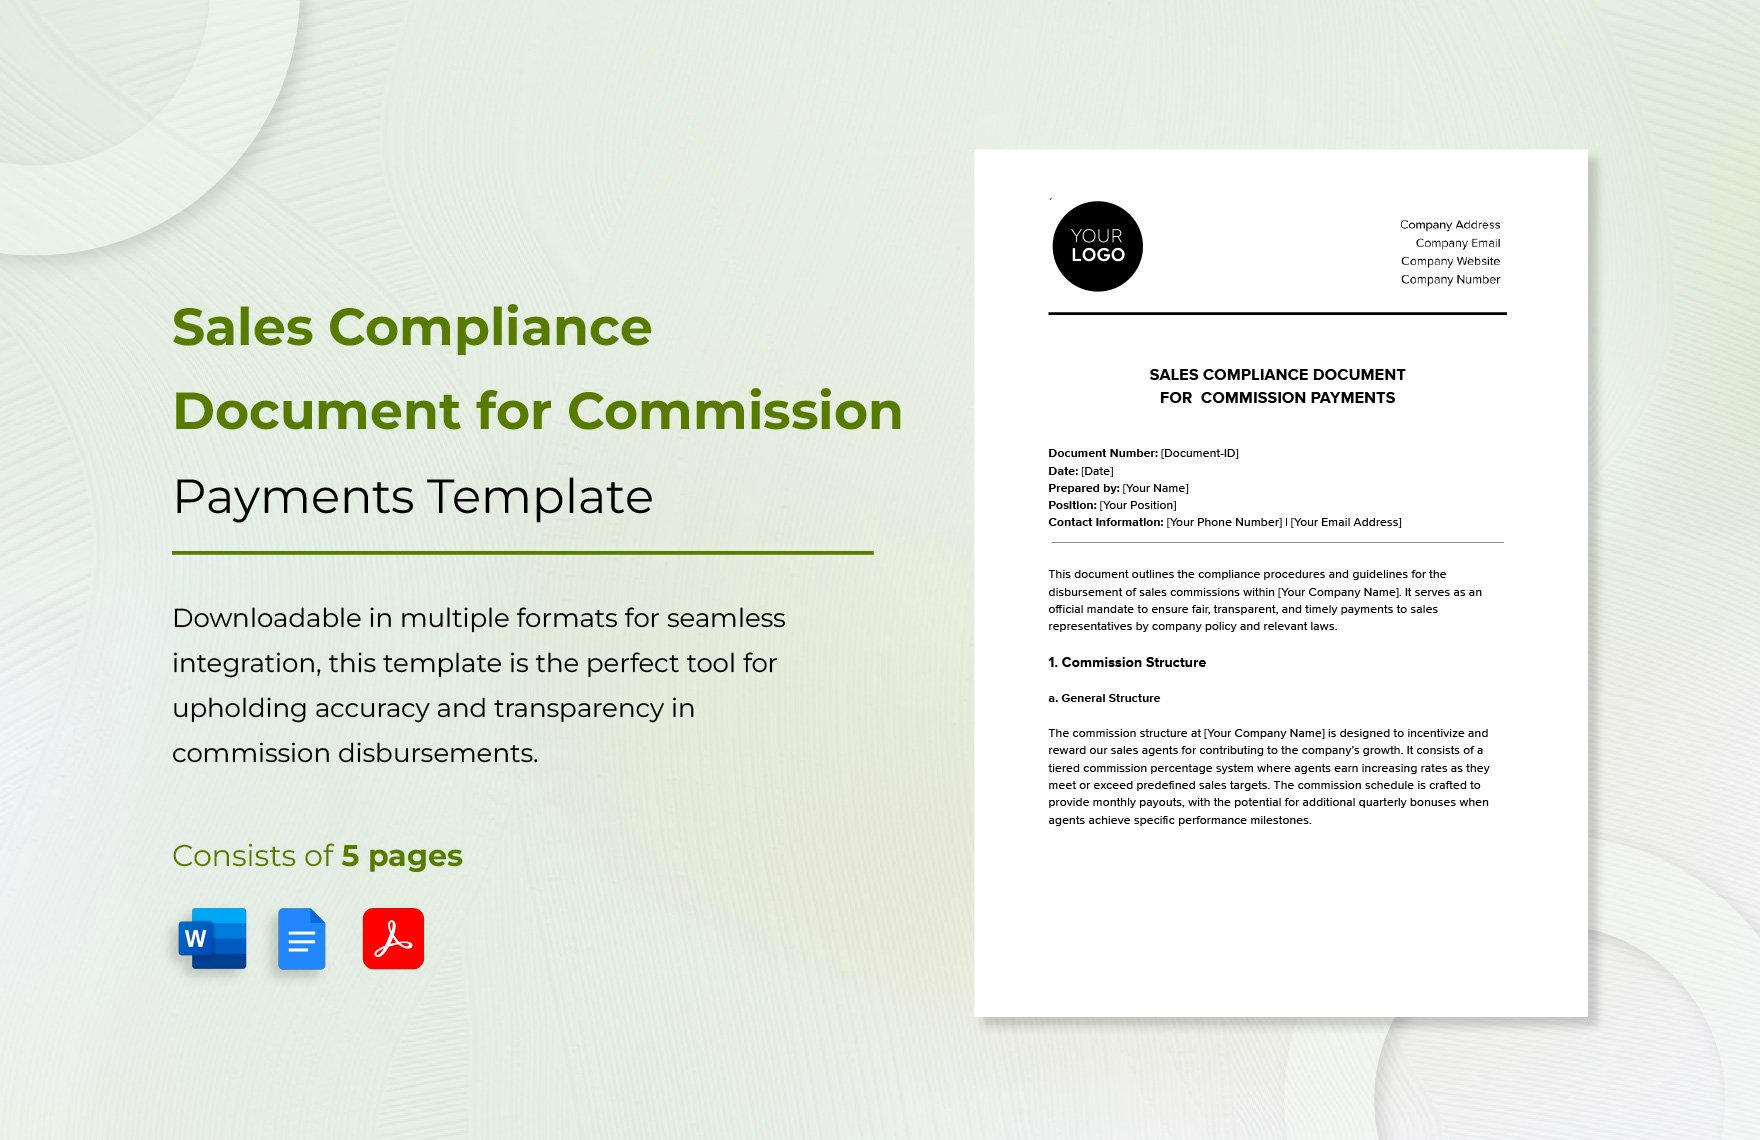 Sales Compliance Document for Commission Payments Template